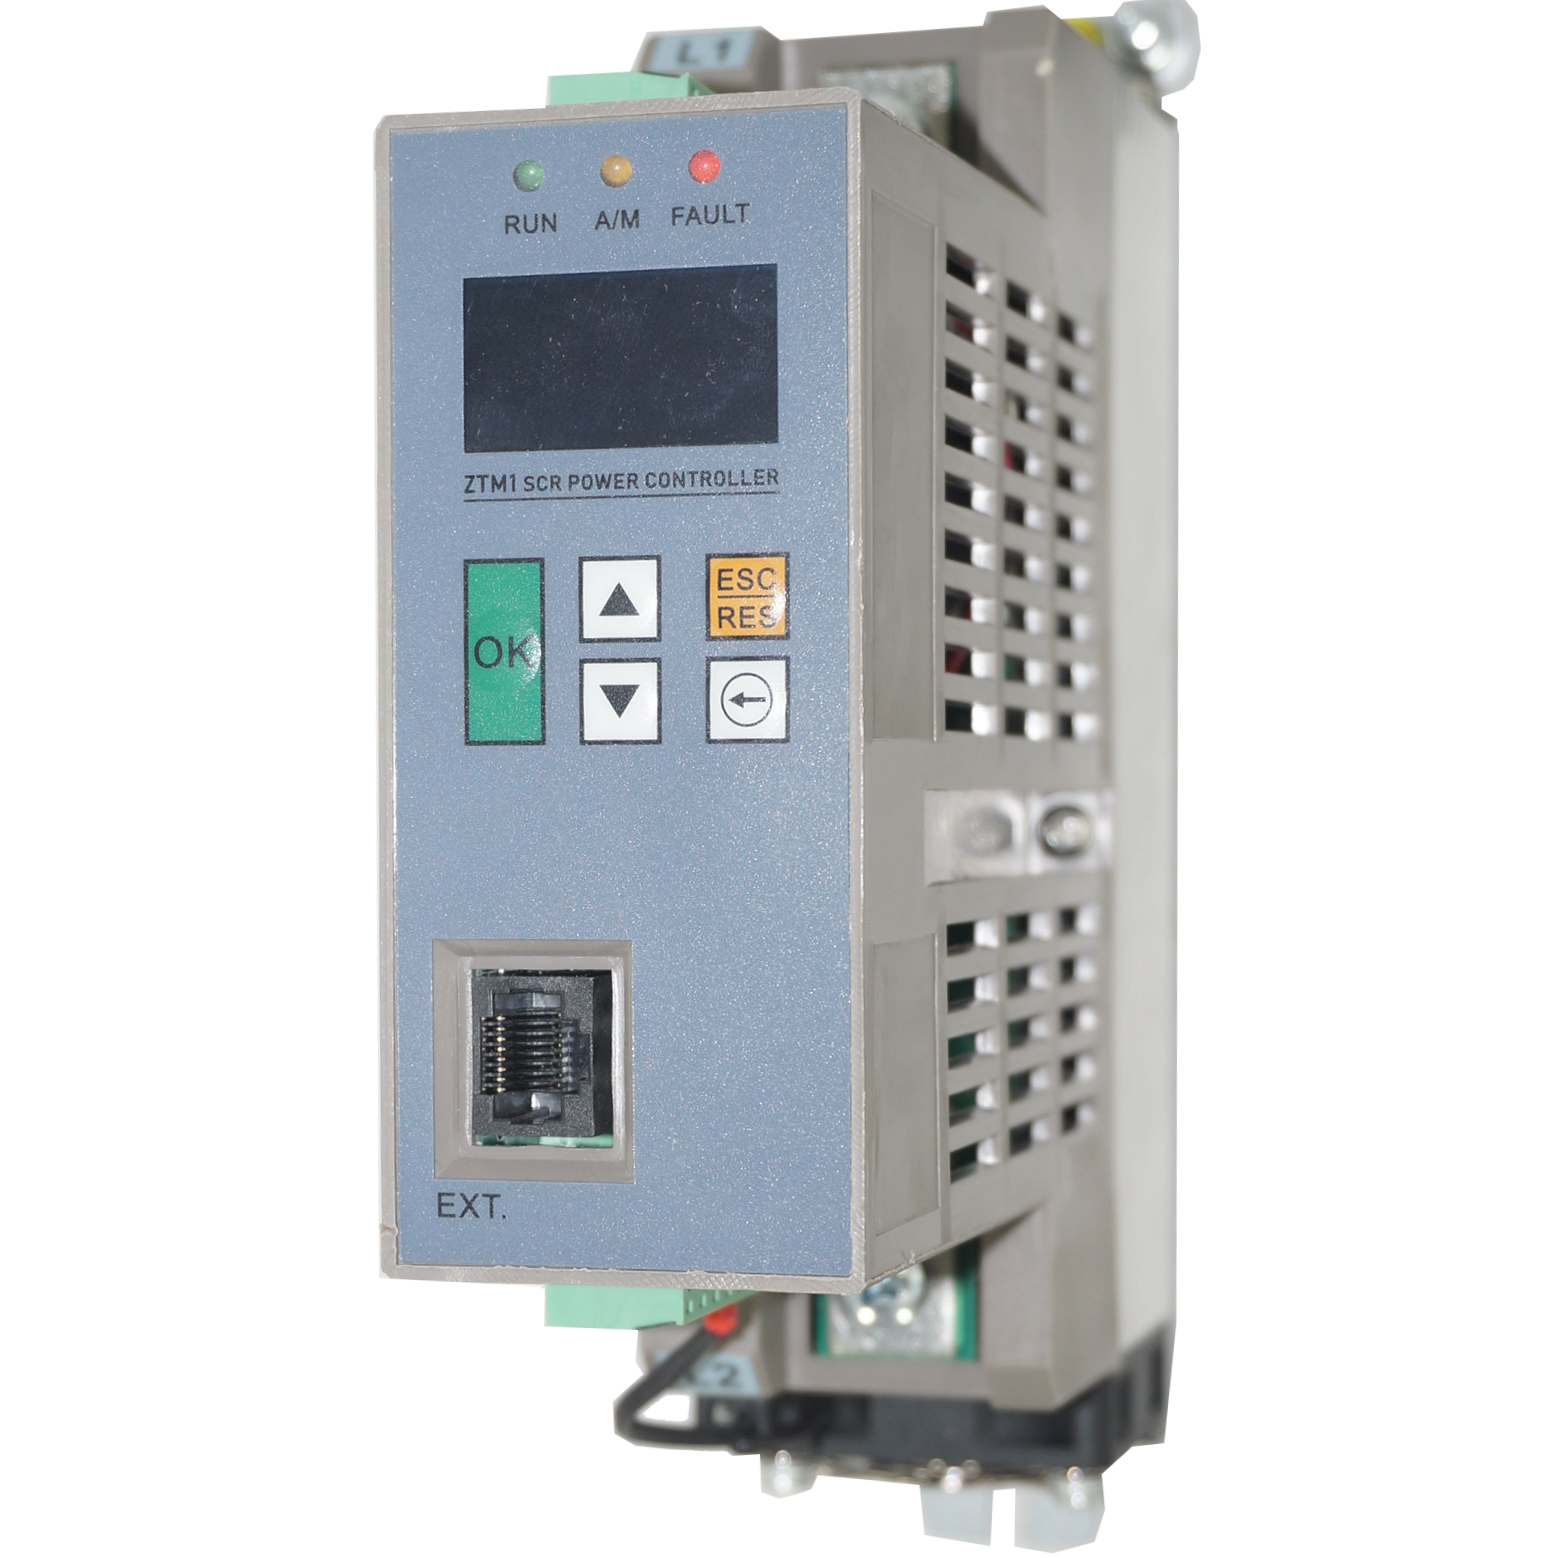 FTM1-A05-V2-W0, Single Phase, Phase Angle/Burst Controller for Primary Control of Transformer (Phase Angle mode only), Voltage/Current/Power Limit Modes, For Single Phase Loads, 230VAC, 4 Amps @ 50 Deg C